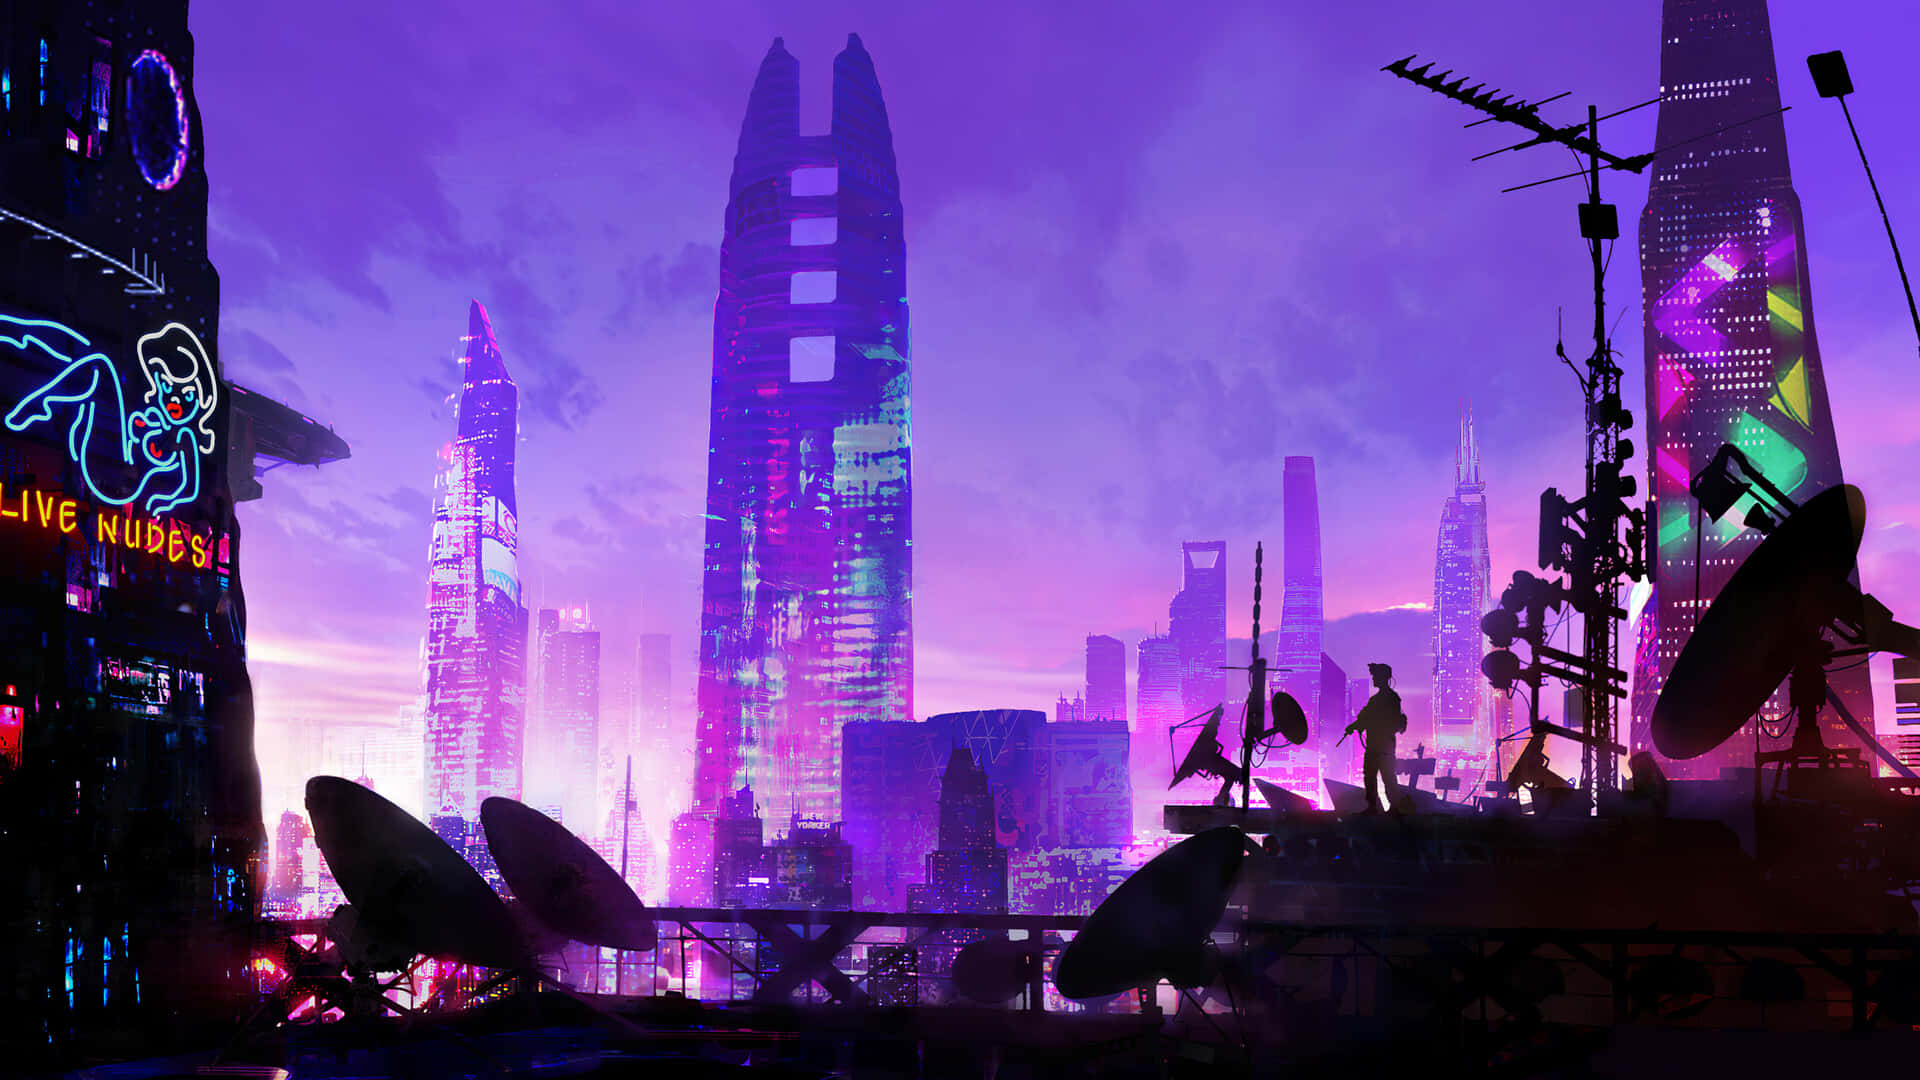 An iconic view of the vibrant city of Cyberpunk